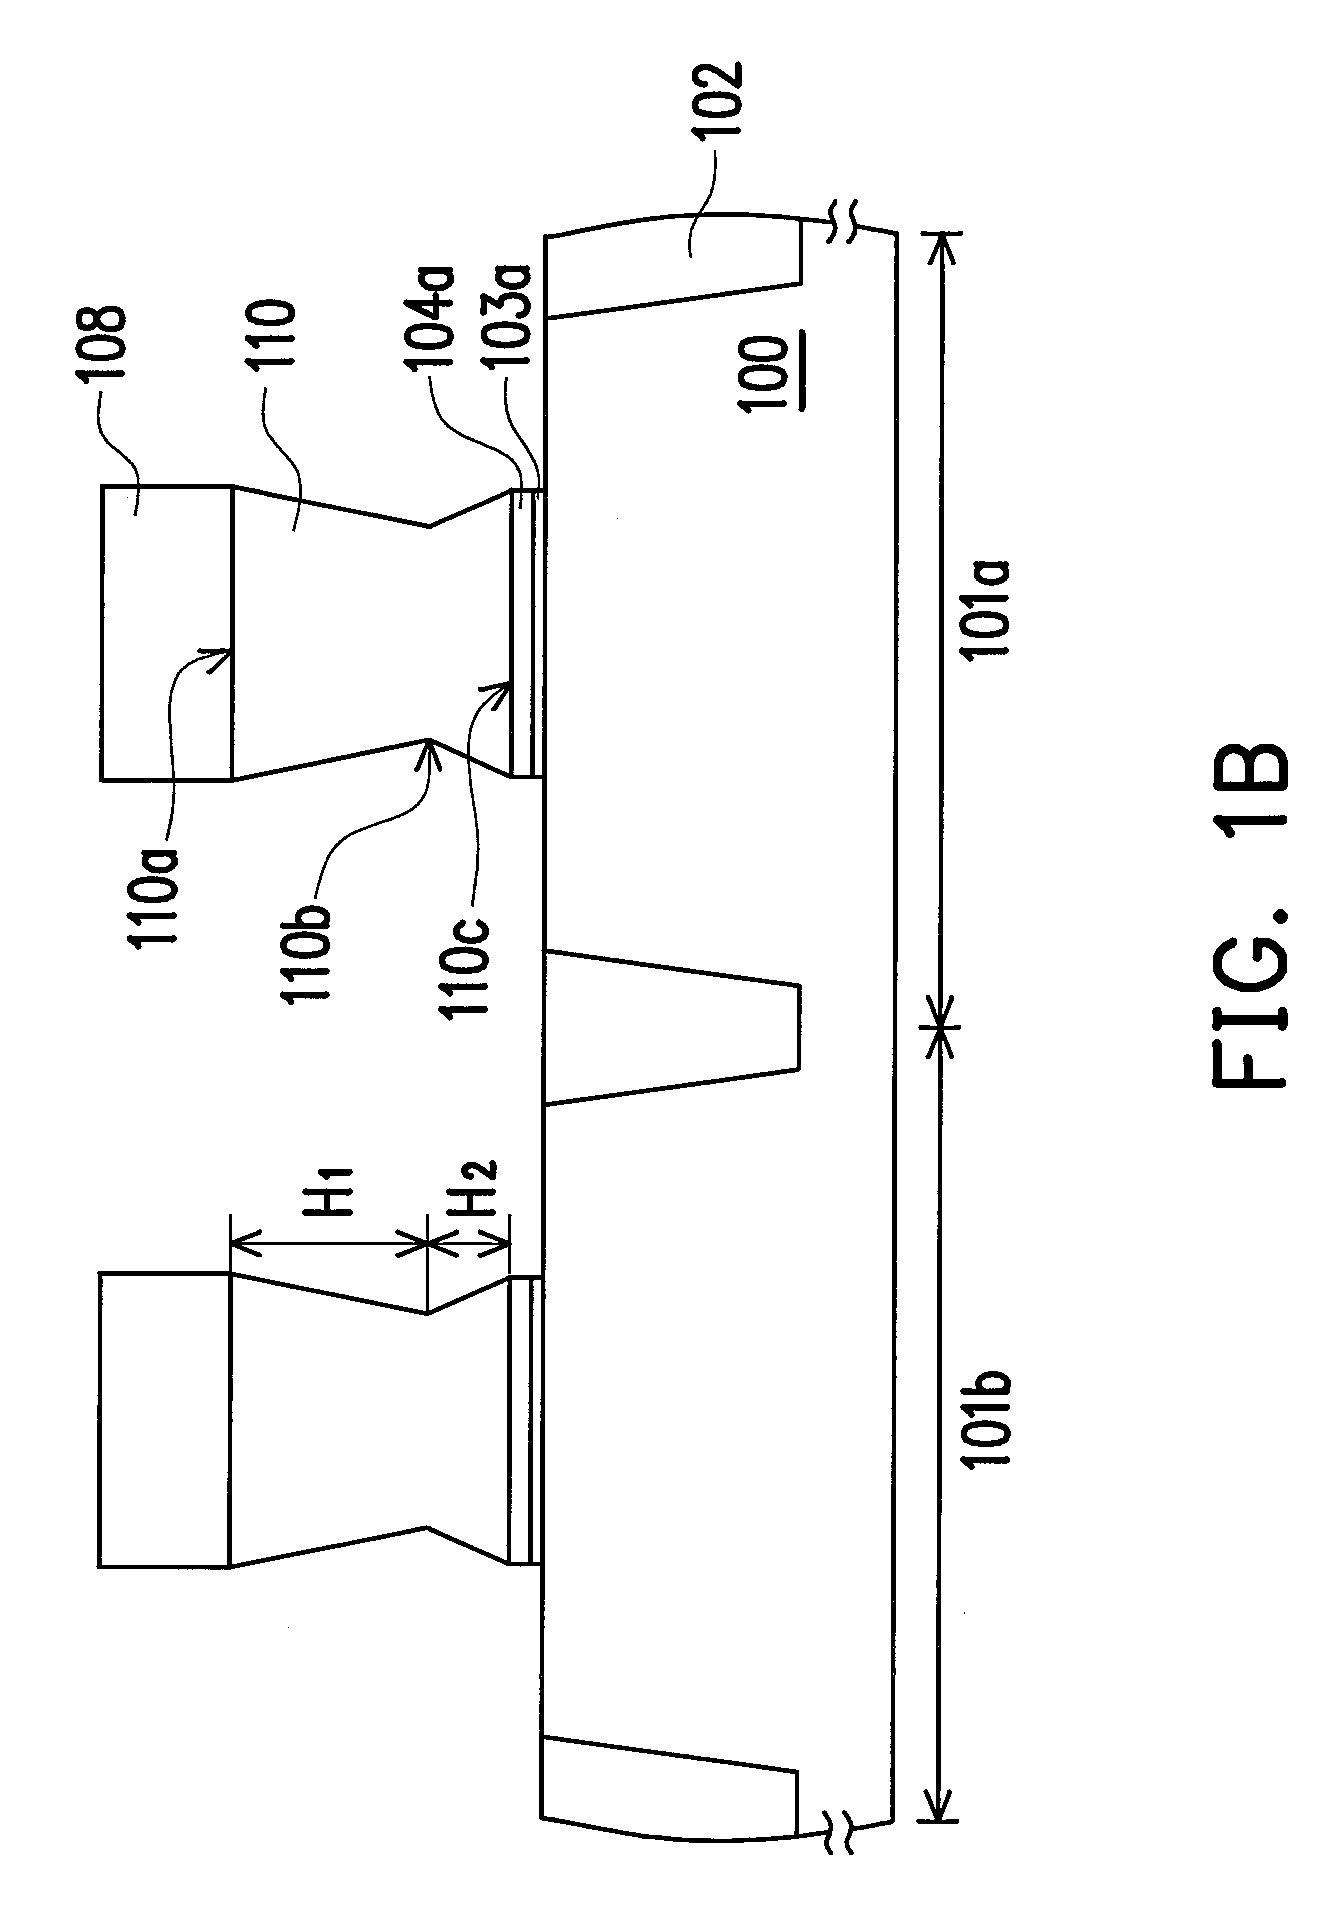 Semiconductor device with trench of various widths